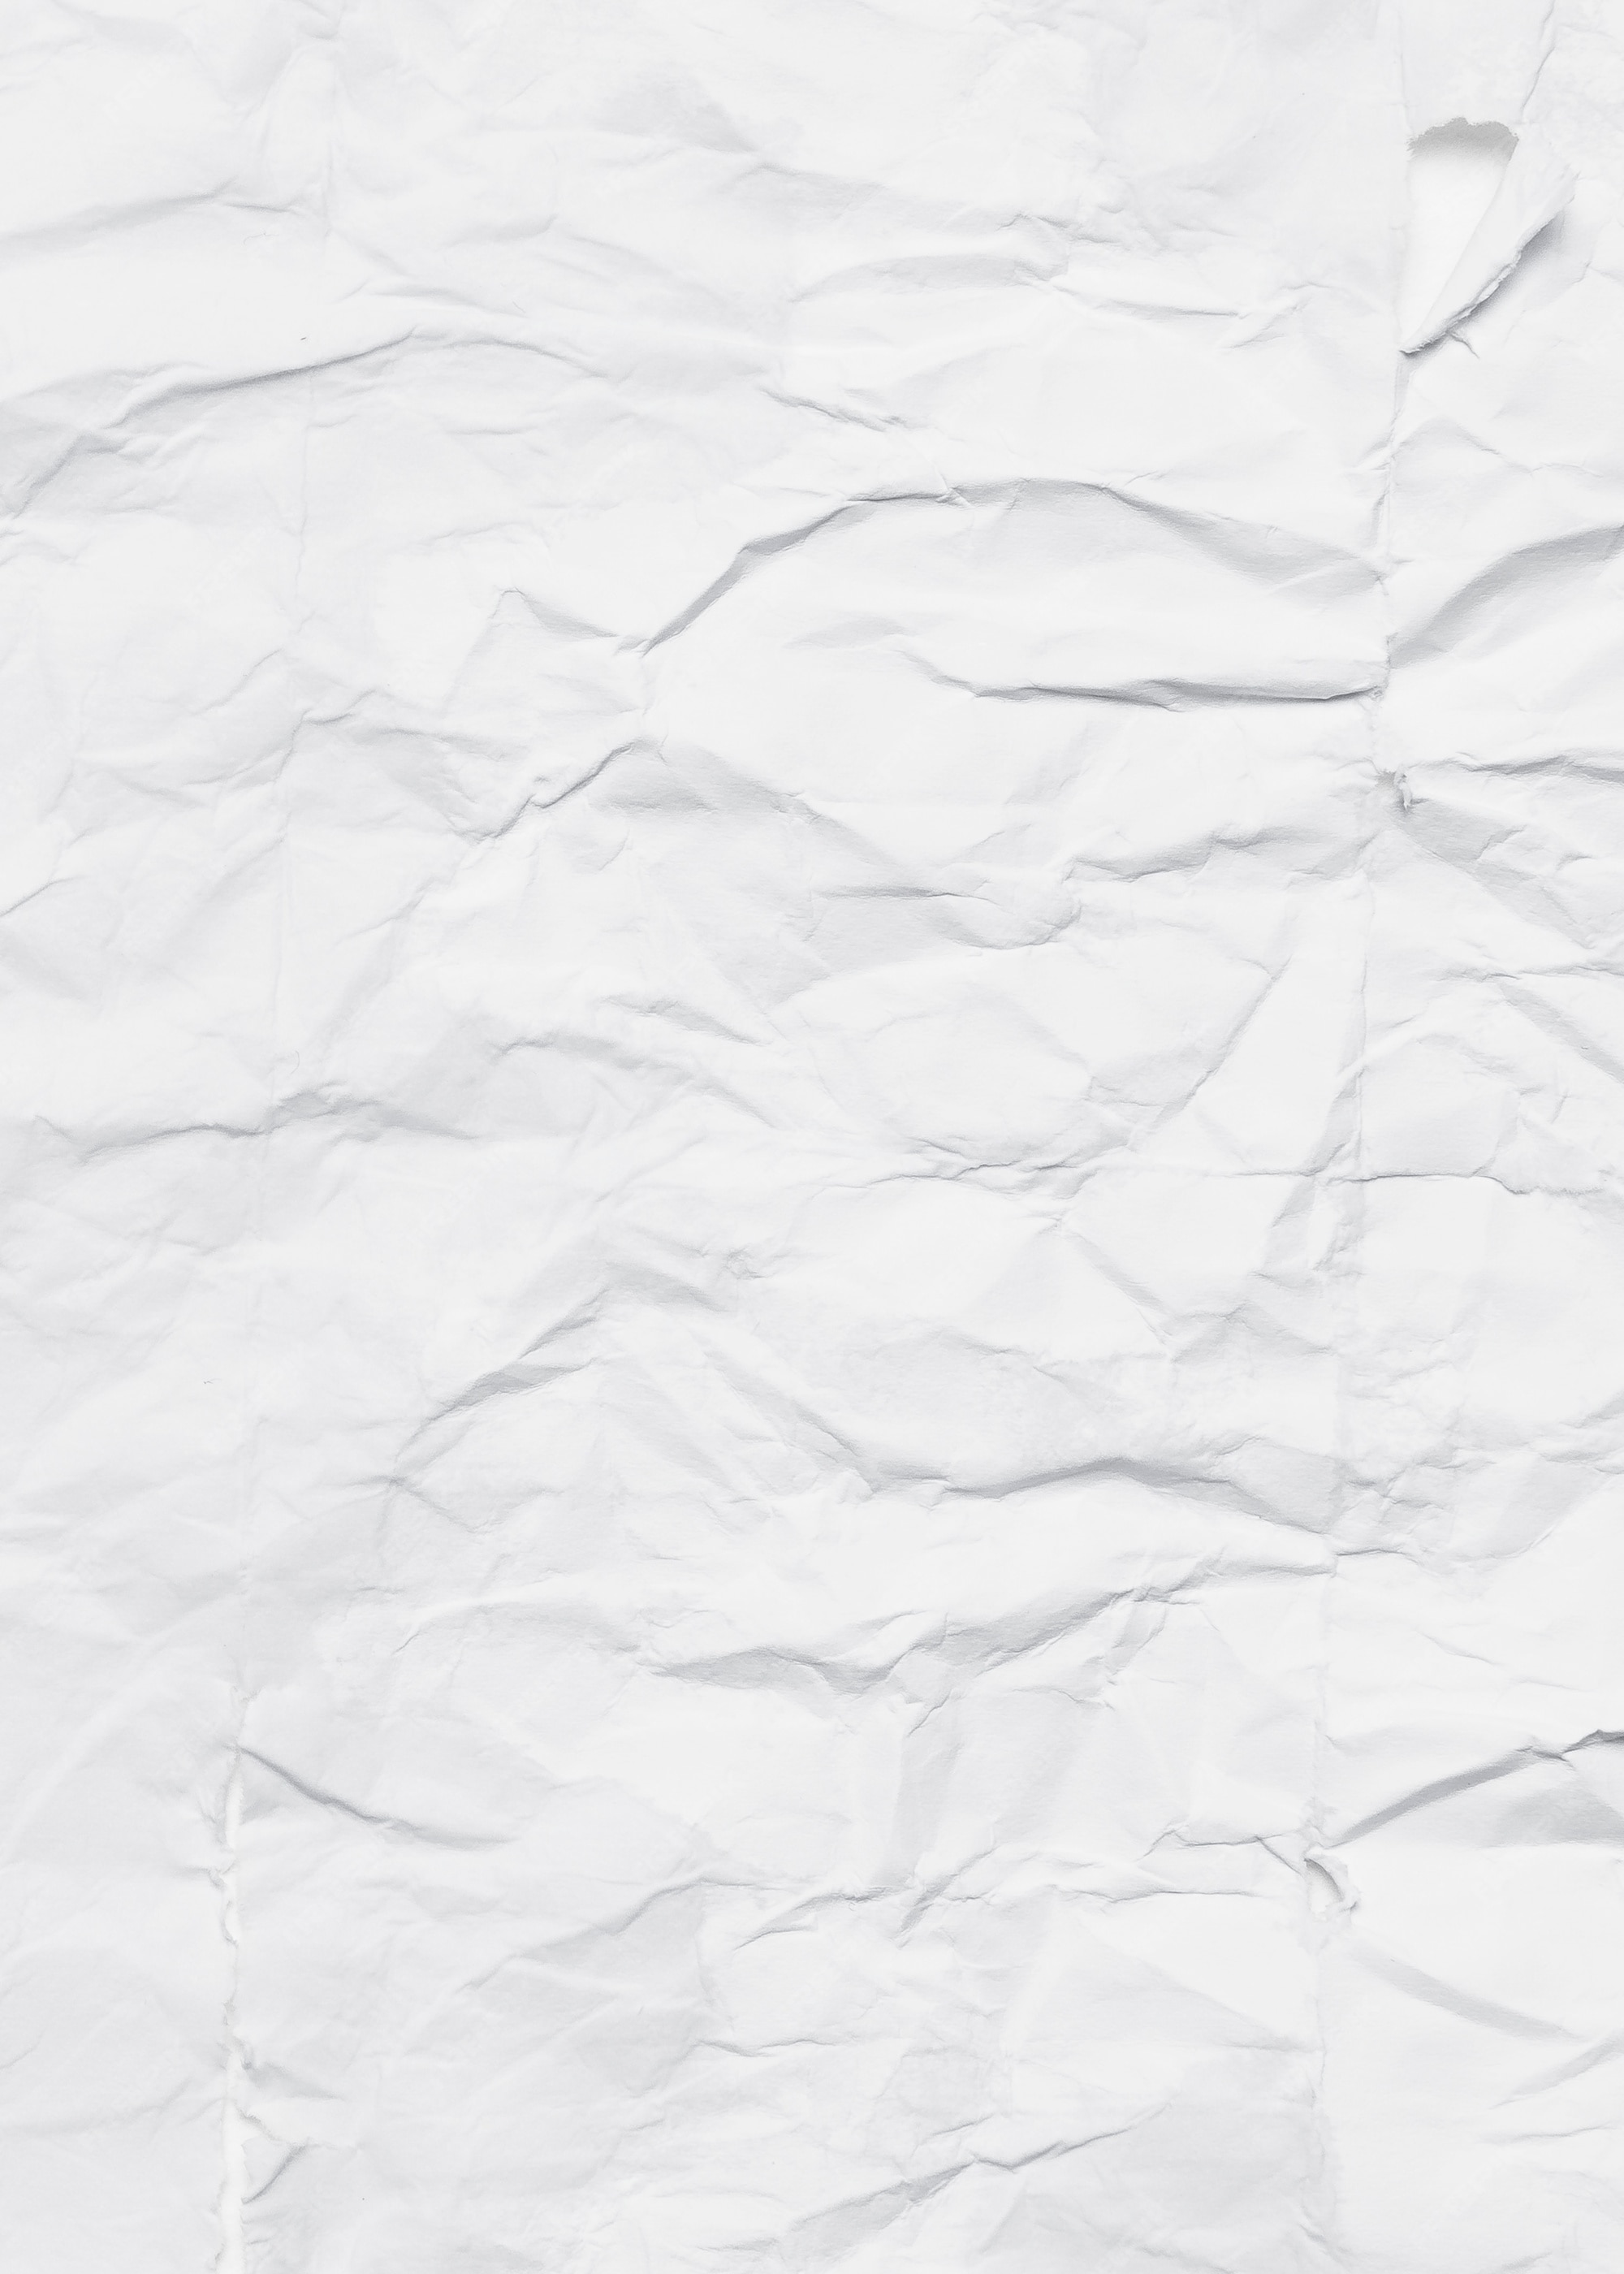 Free images of Paper white background for your design projects